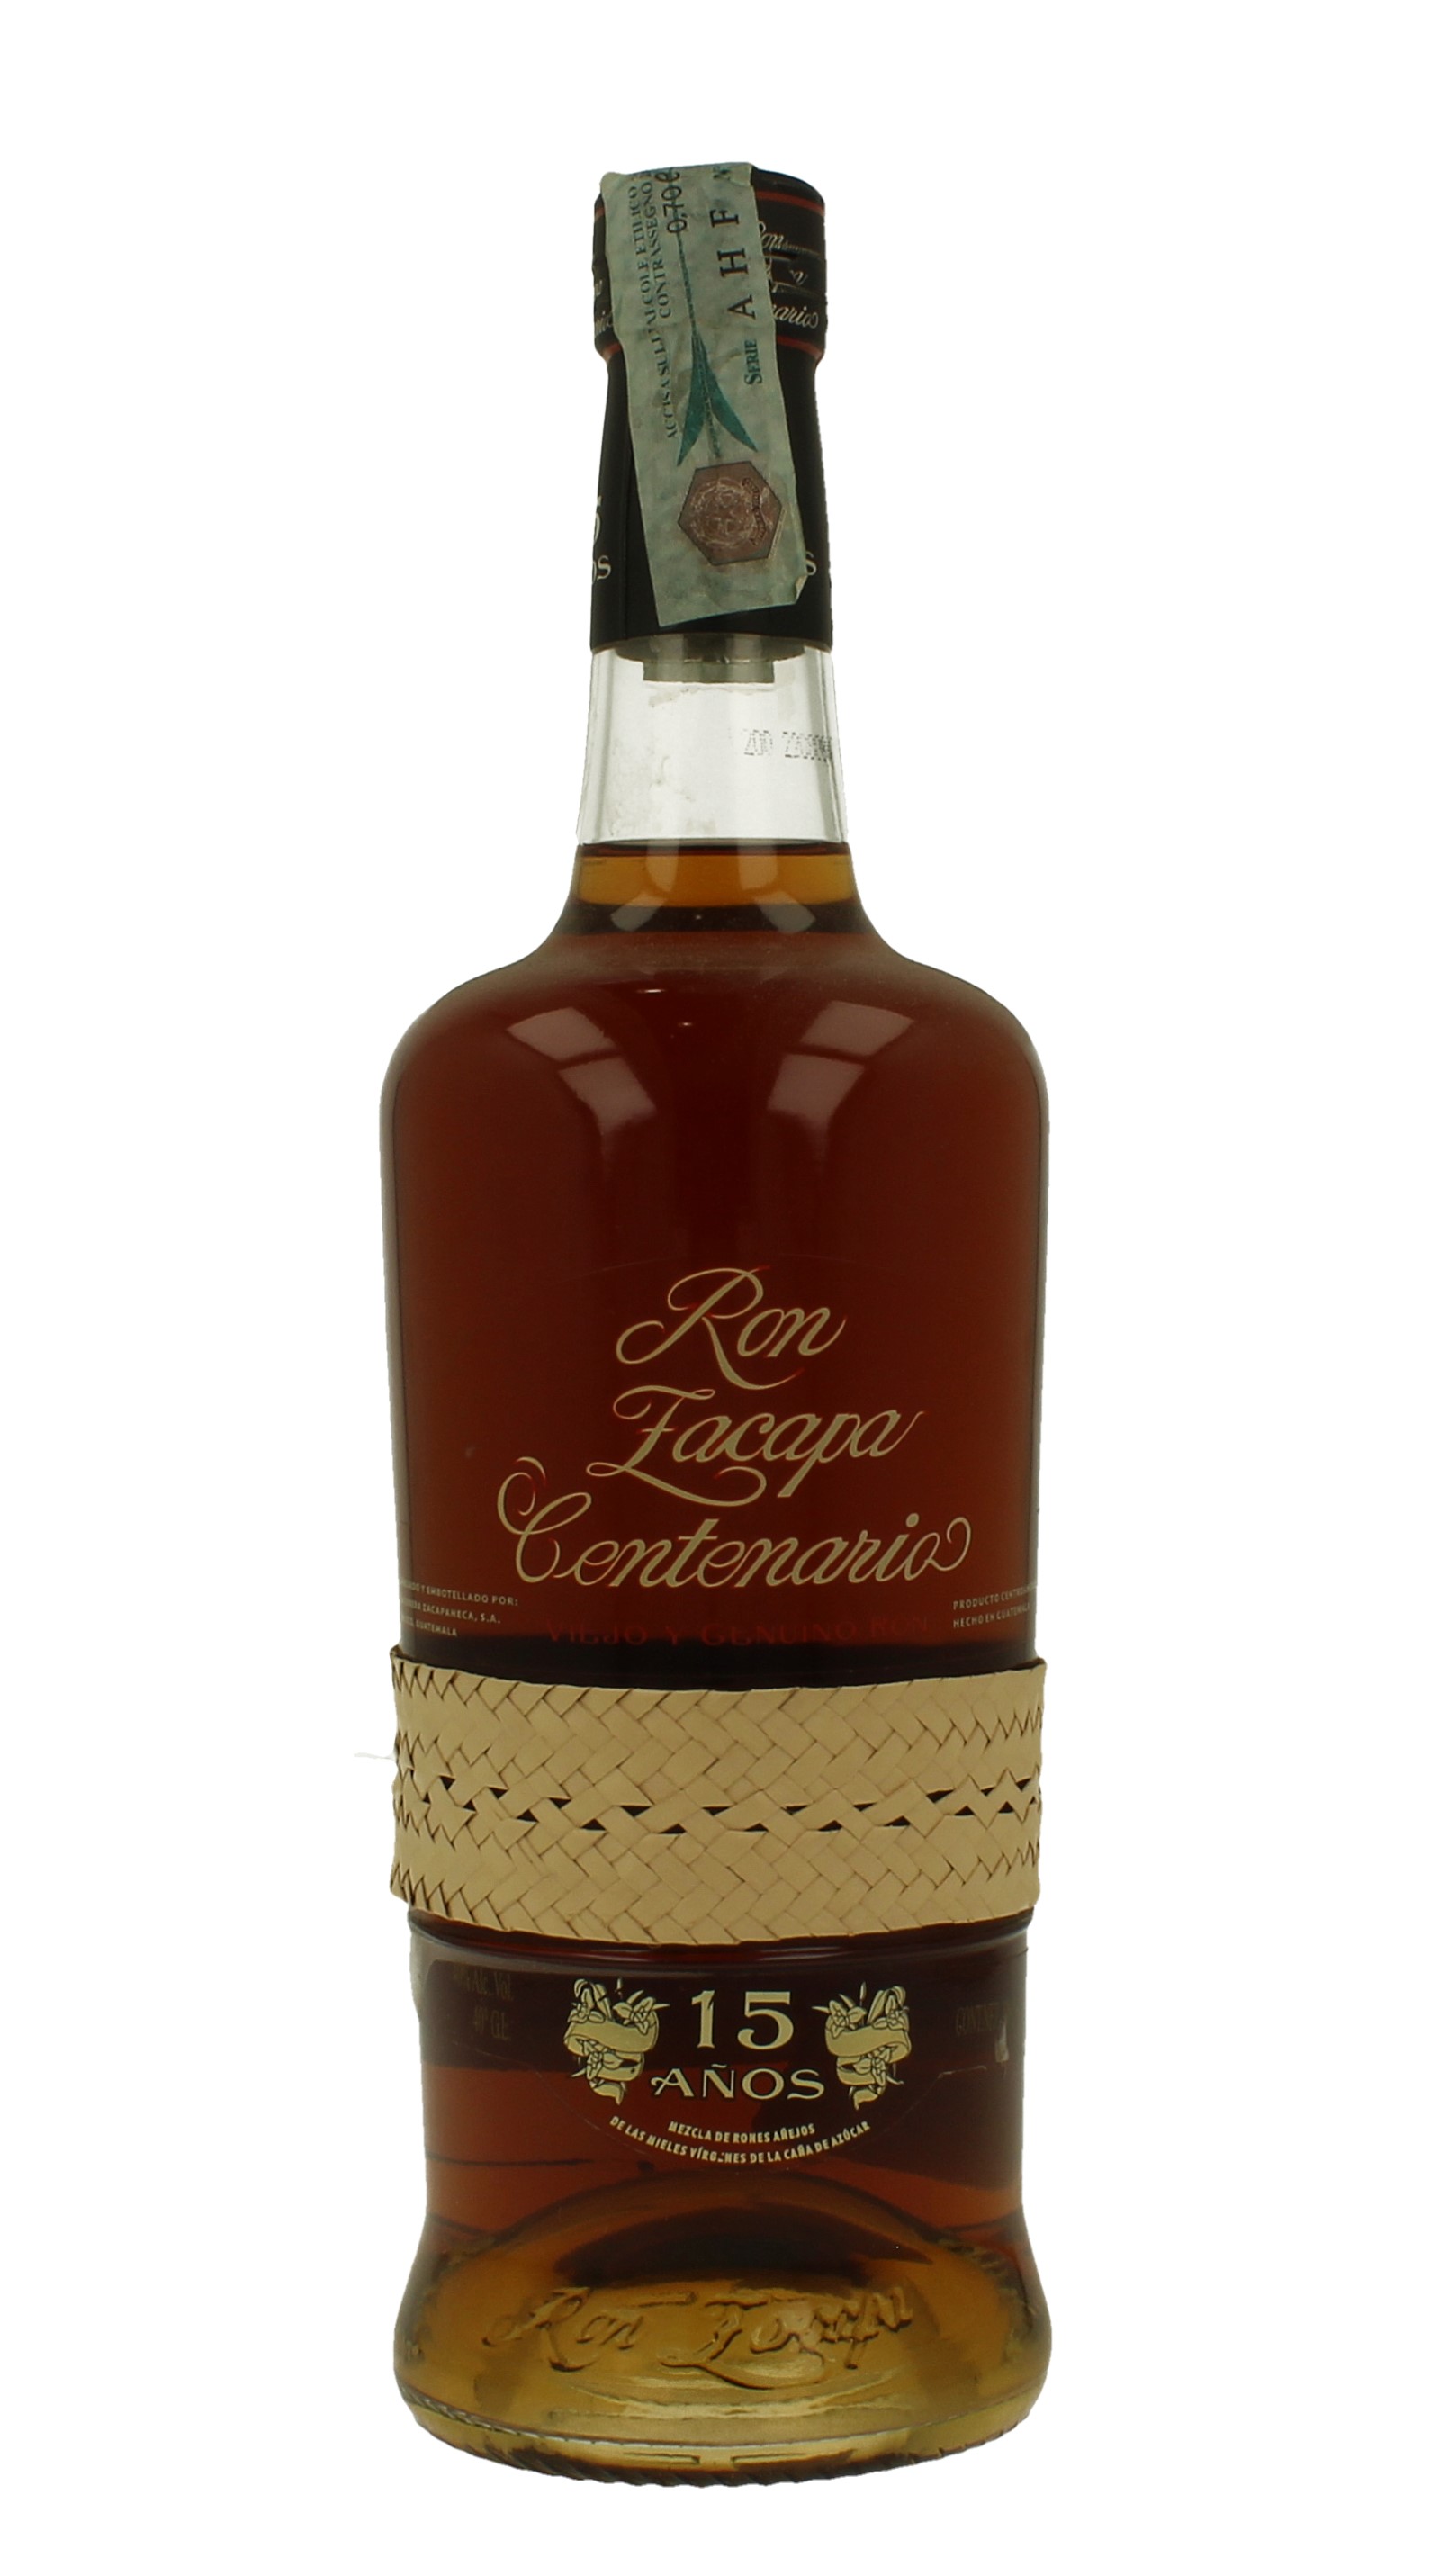 RHUM RUM RON ZACAPA CENTENARIO STRAIGHT FROM THE CASK SPECIAL EDITION 45%  70cl.